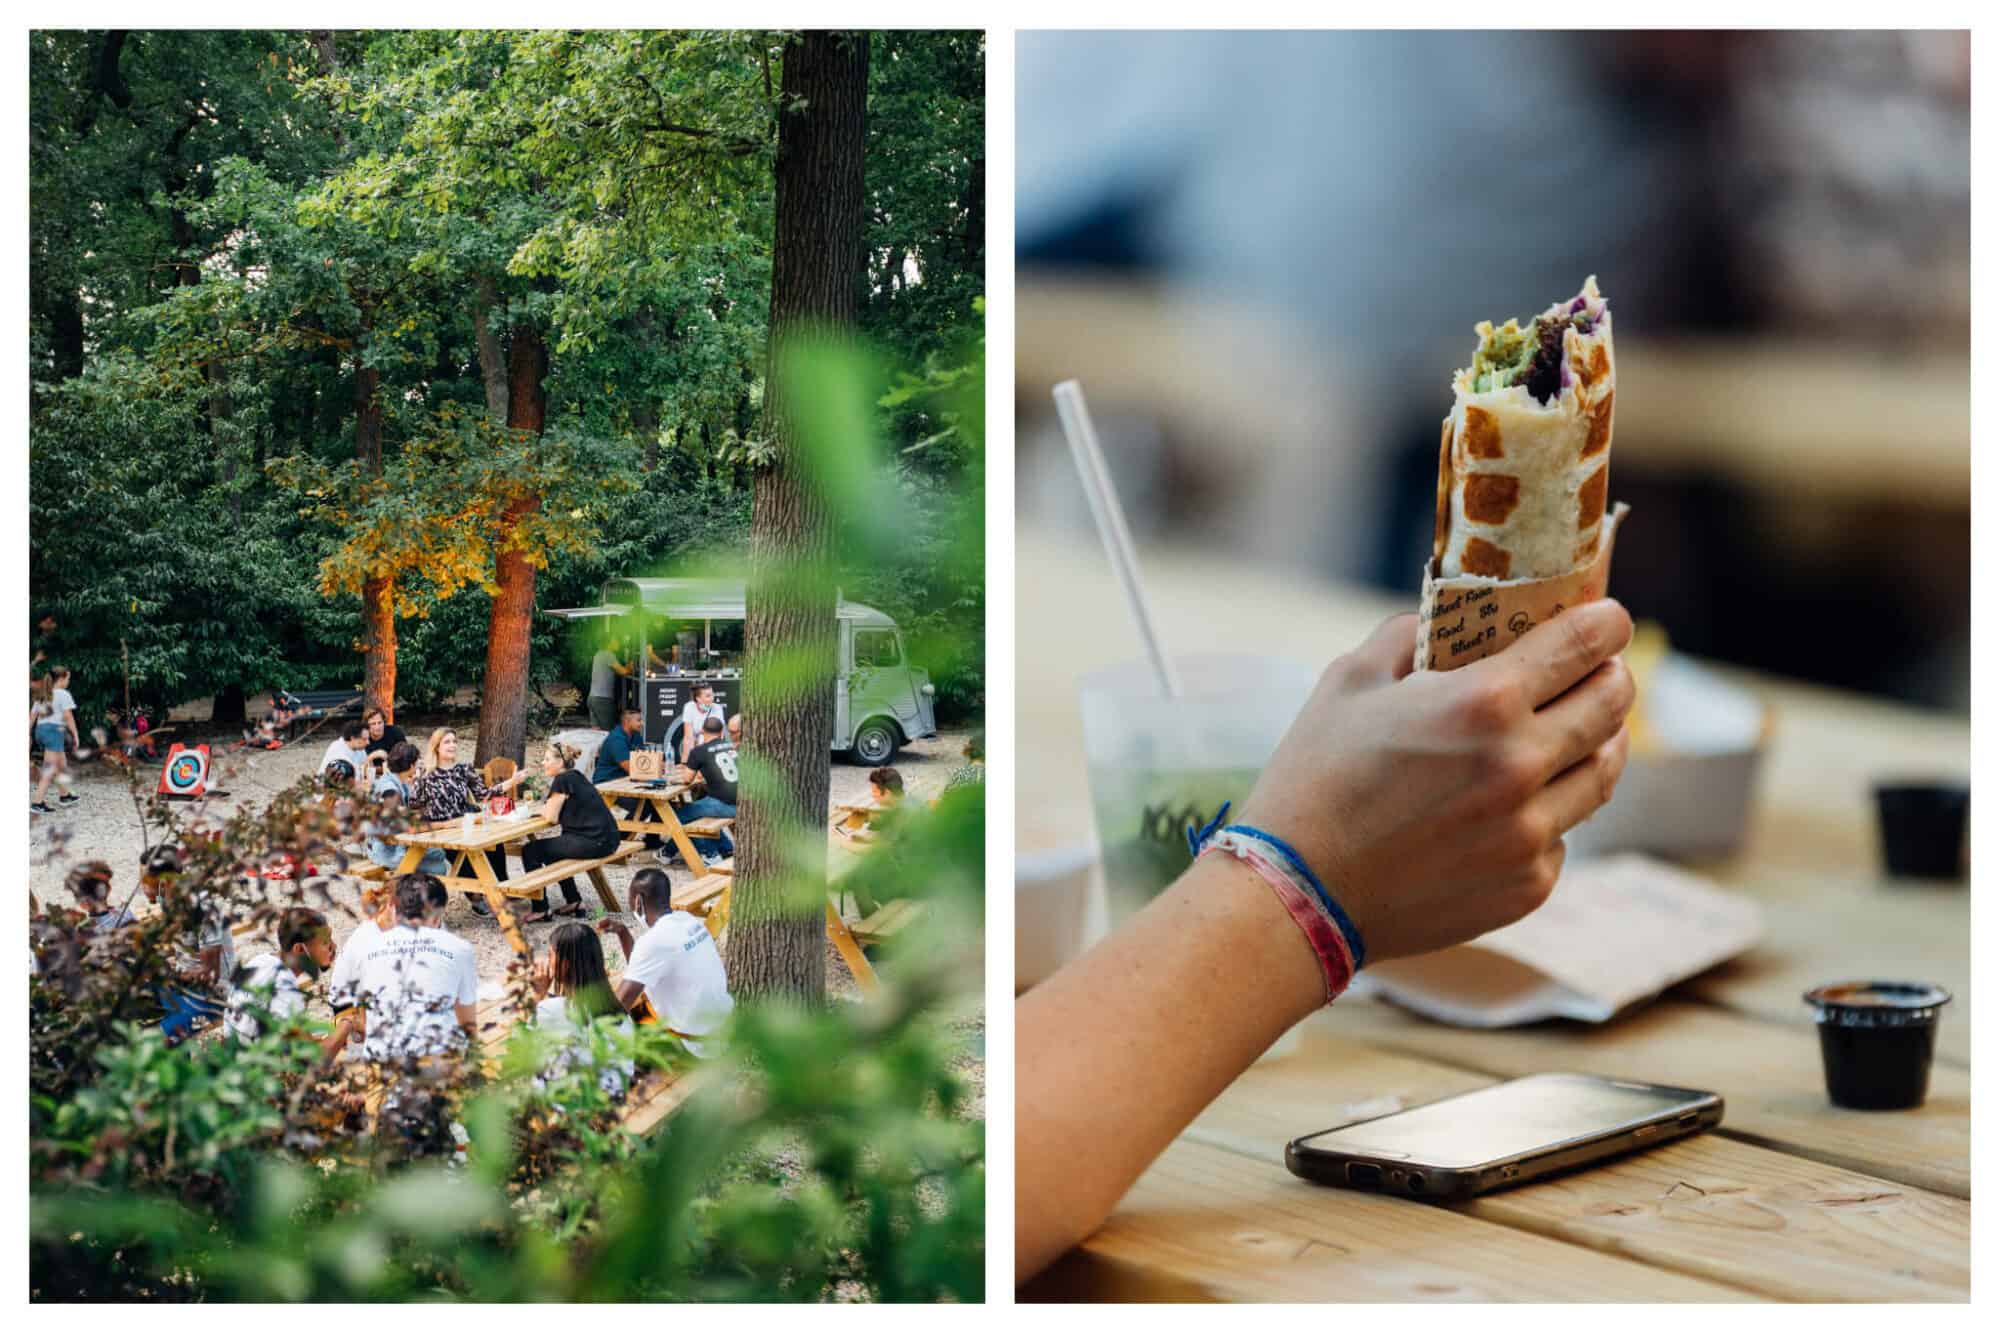 Left: people seated at wooden bench tables surrounded by greenery. Right: a wrap in the hand of a person seated at a wooden bench table. There is a drink on the table as well as a dipping sauce and an iPhone. 